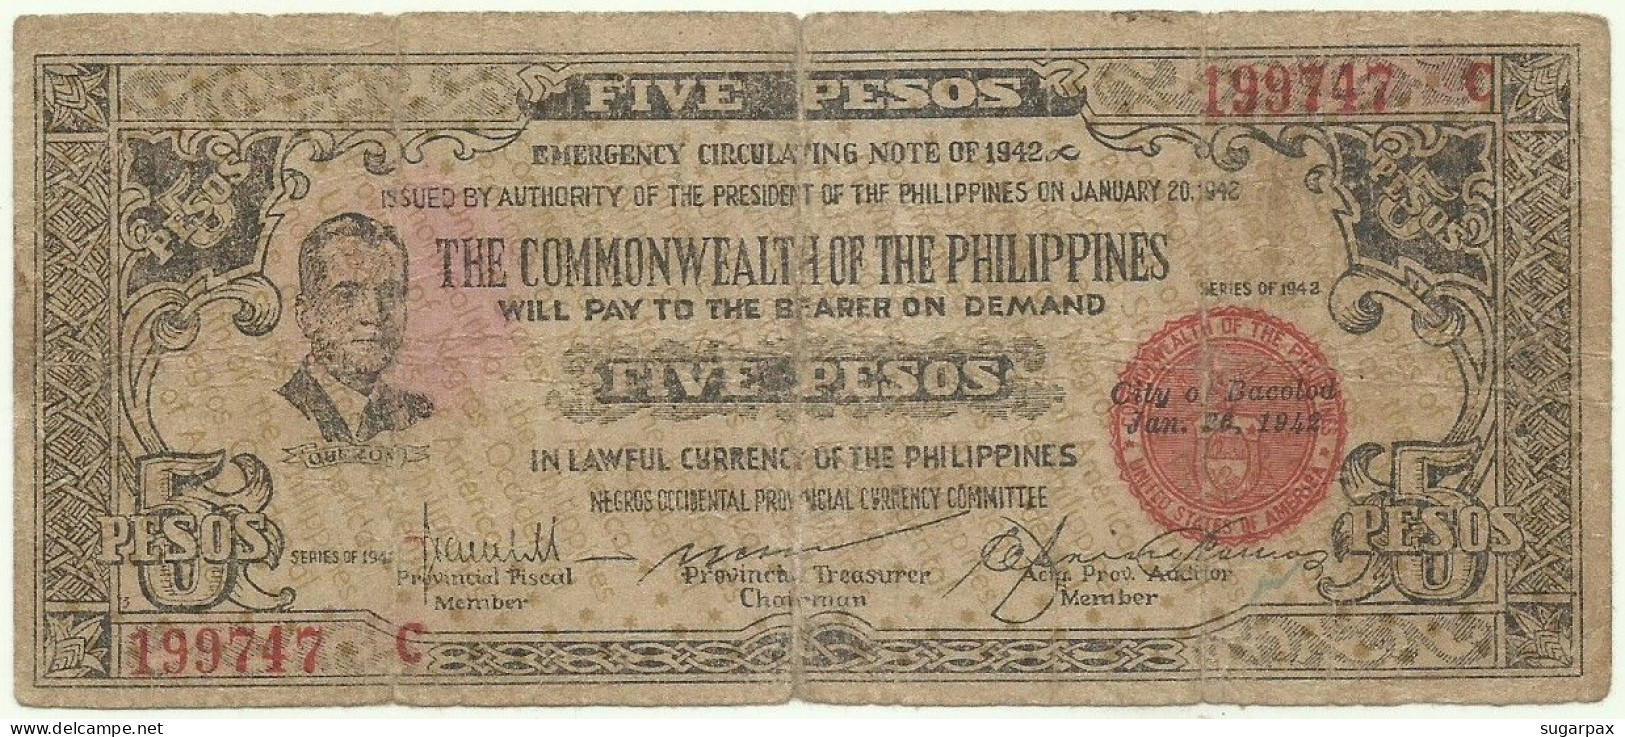 PHILIPPINES - 5 Pesos - 1942 - Pick S 648.a - Serie C - NEGROS Occidental Provincial Currency Committee - Filippijnen